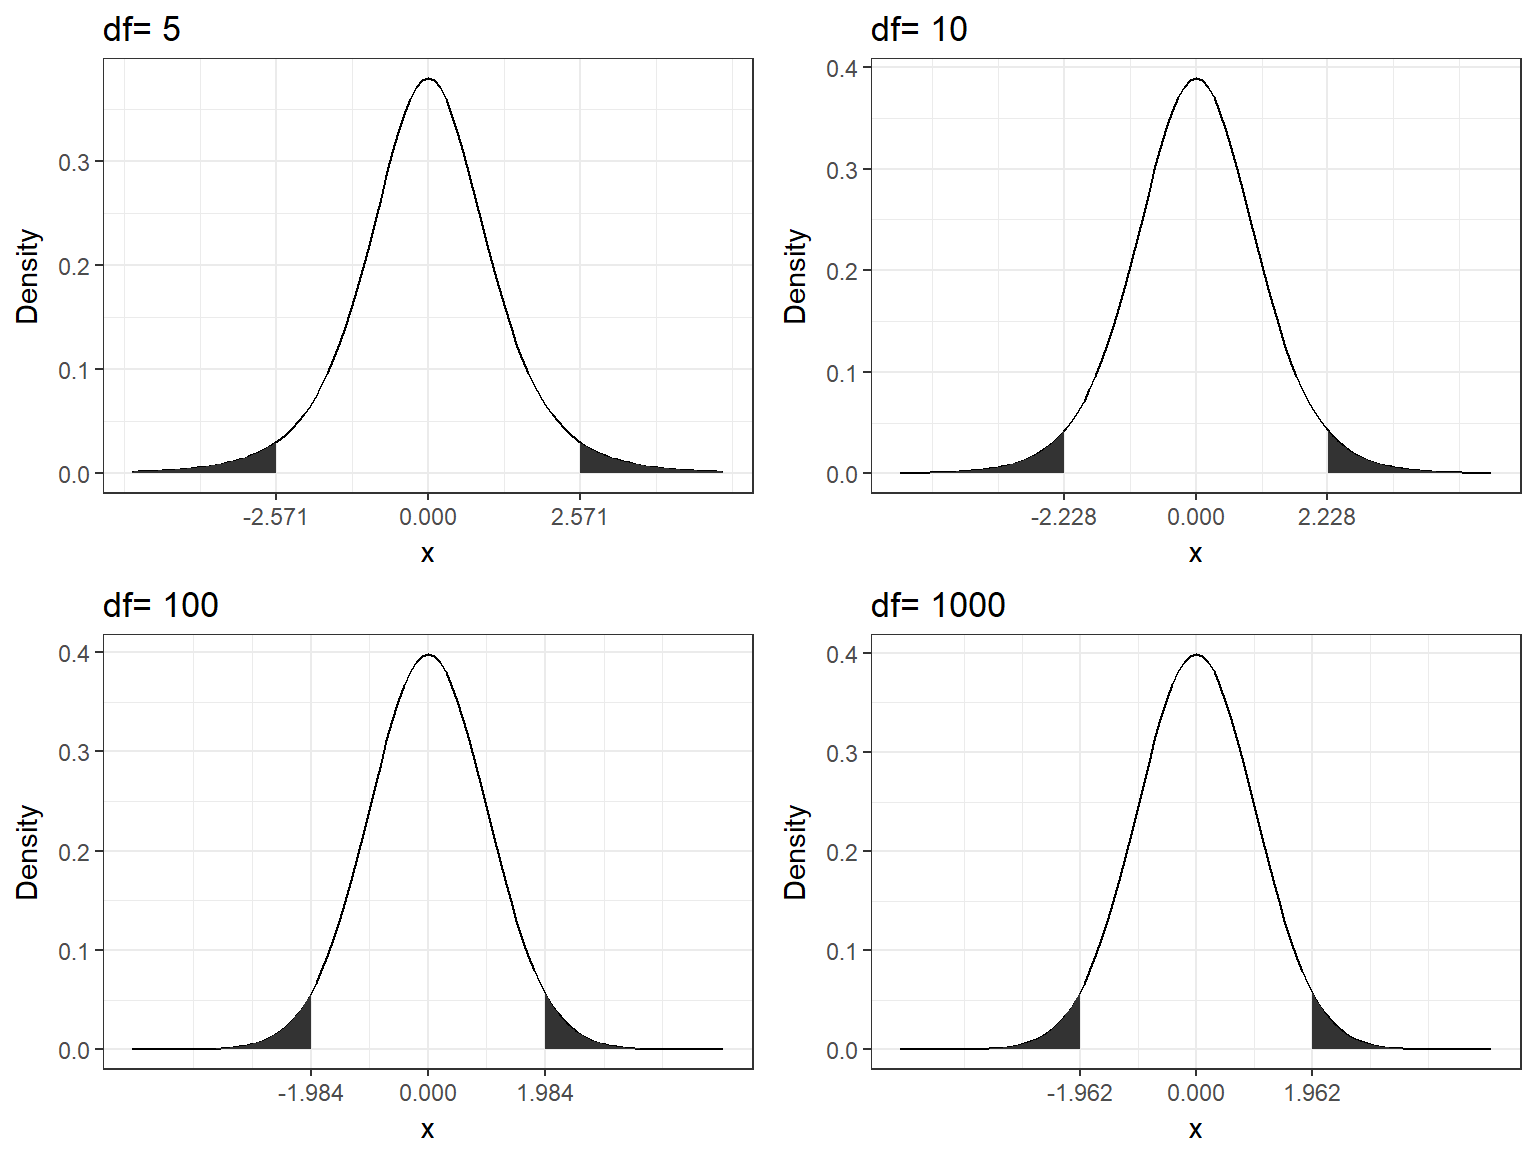 Critical values for t-distribution (two-tailed, alpha=0.05)